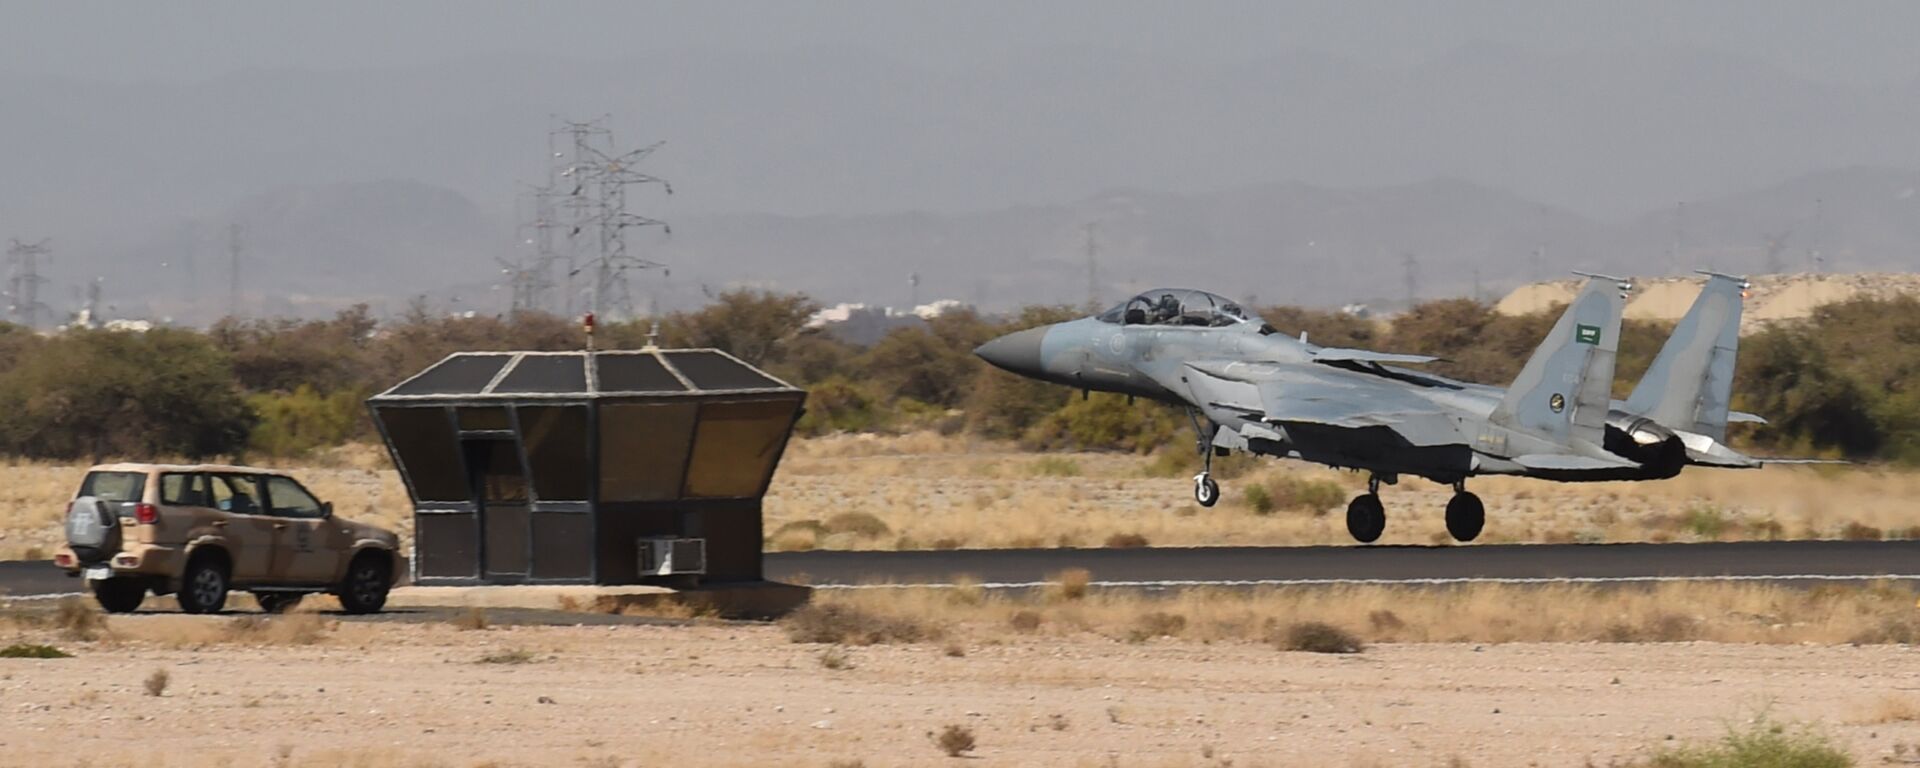 A picture taken on November 16, 2015 shows a Saudi F-15 fighter jet landing at the Khamis Mushayt military airbase, some 880 km from the capital Riyadh - Sputnik International, 1920, 18.10.2022